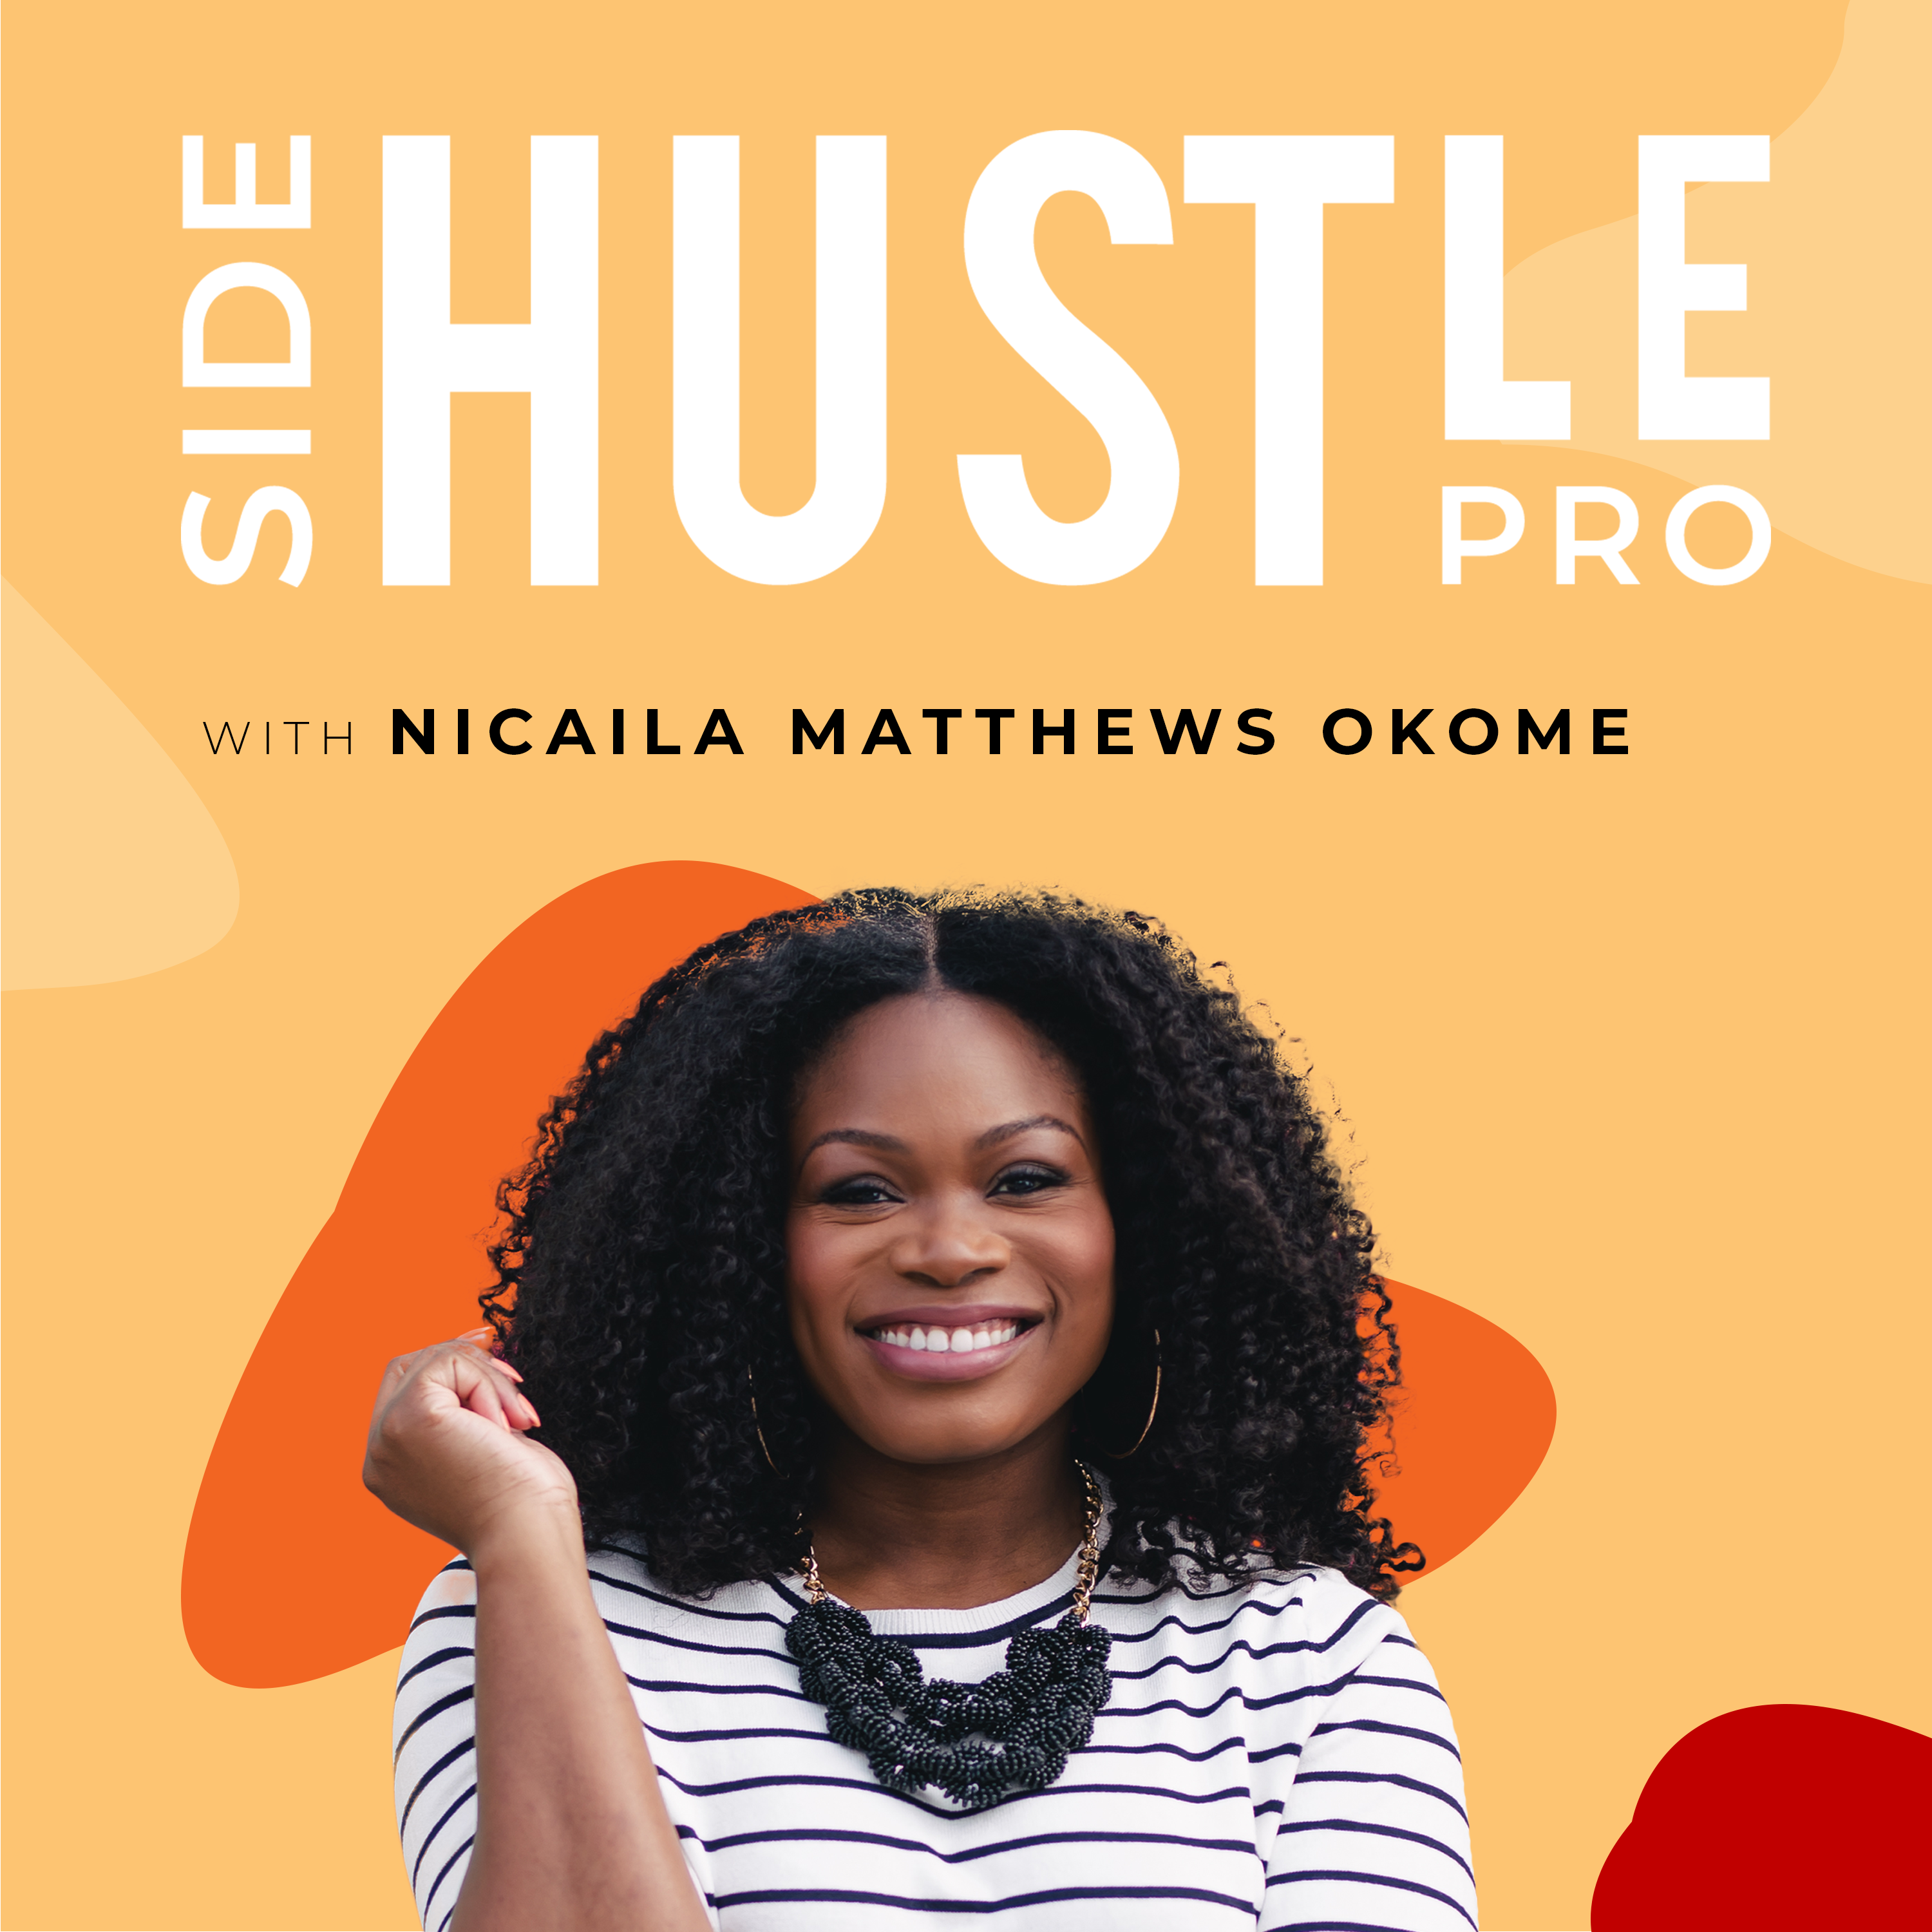 241: How Eniola Oshodi Founded Dope Scrubs And Upgraded The Workwear Game For Medical Professionals